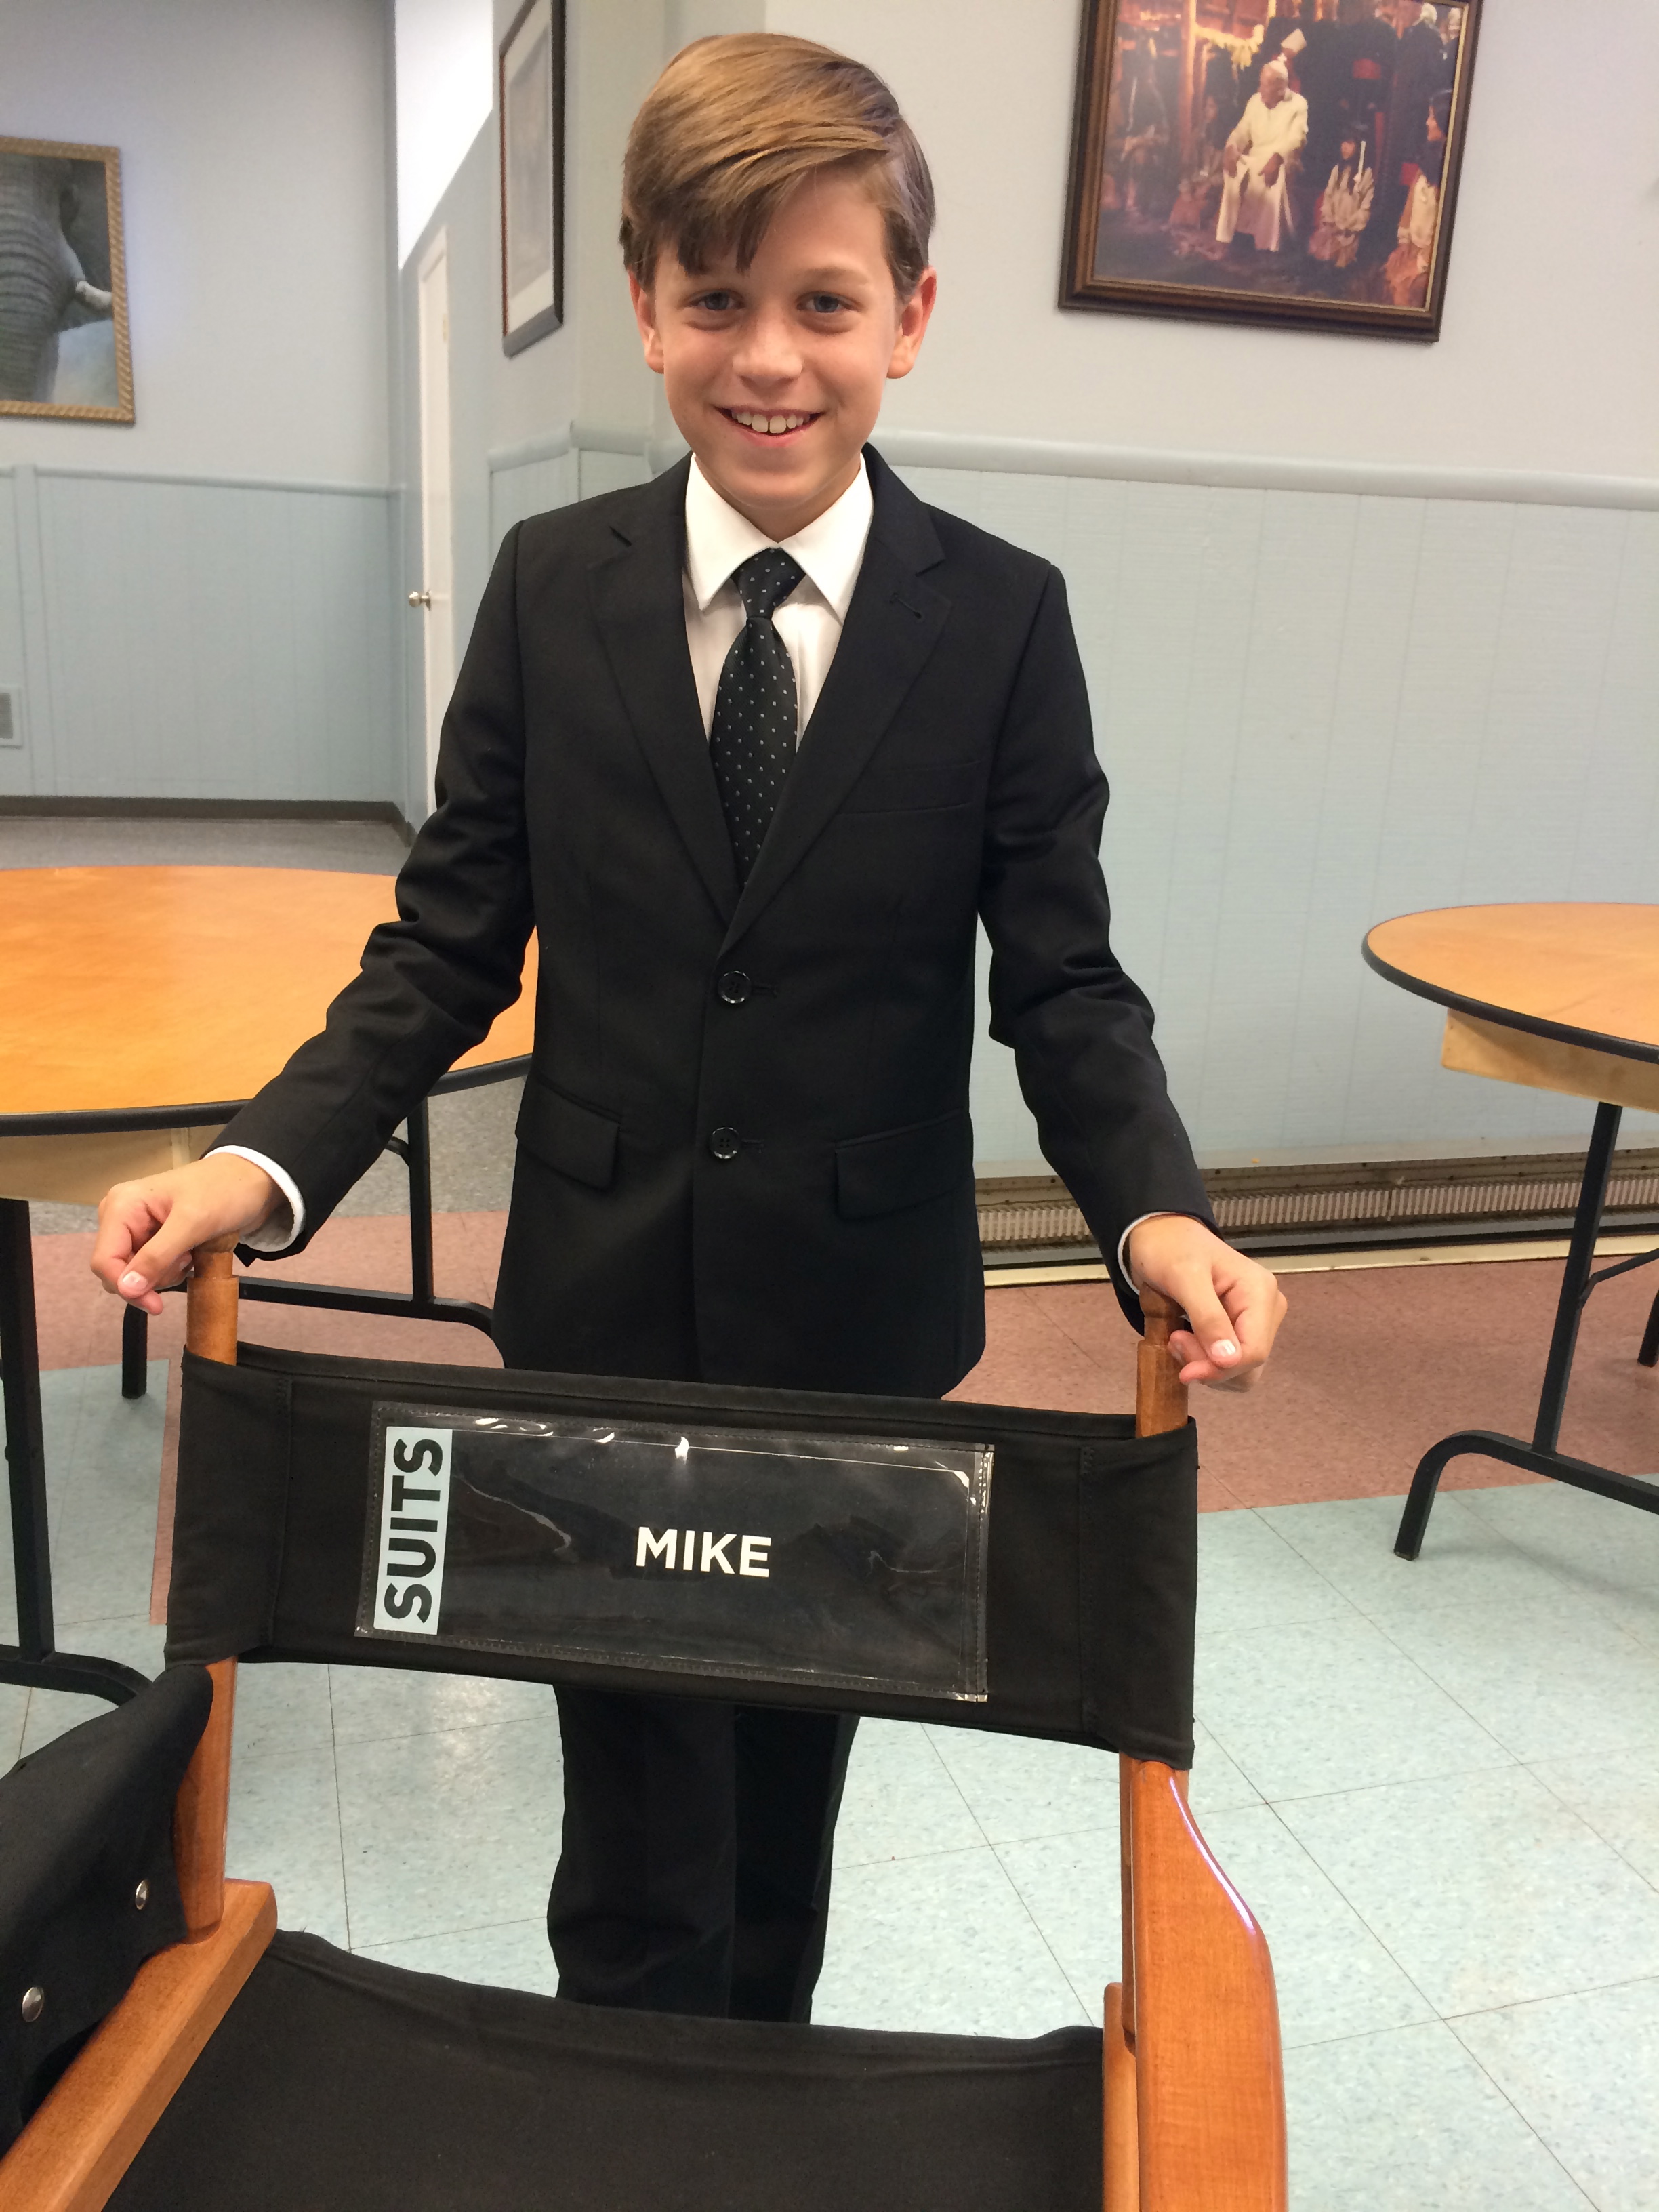 Jacob Buster on the set of SUITS playing Young Mike.